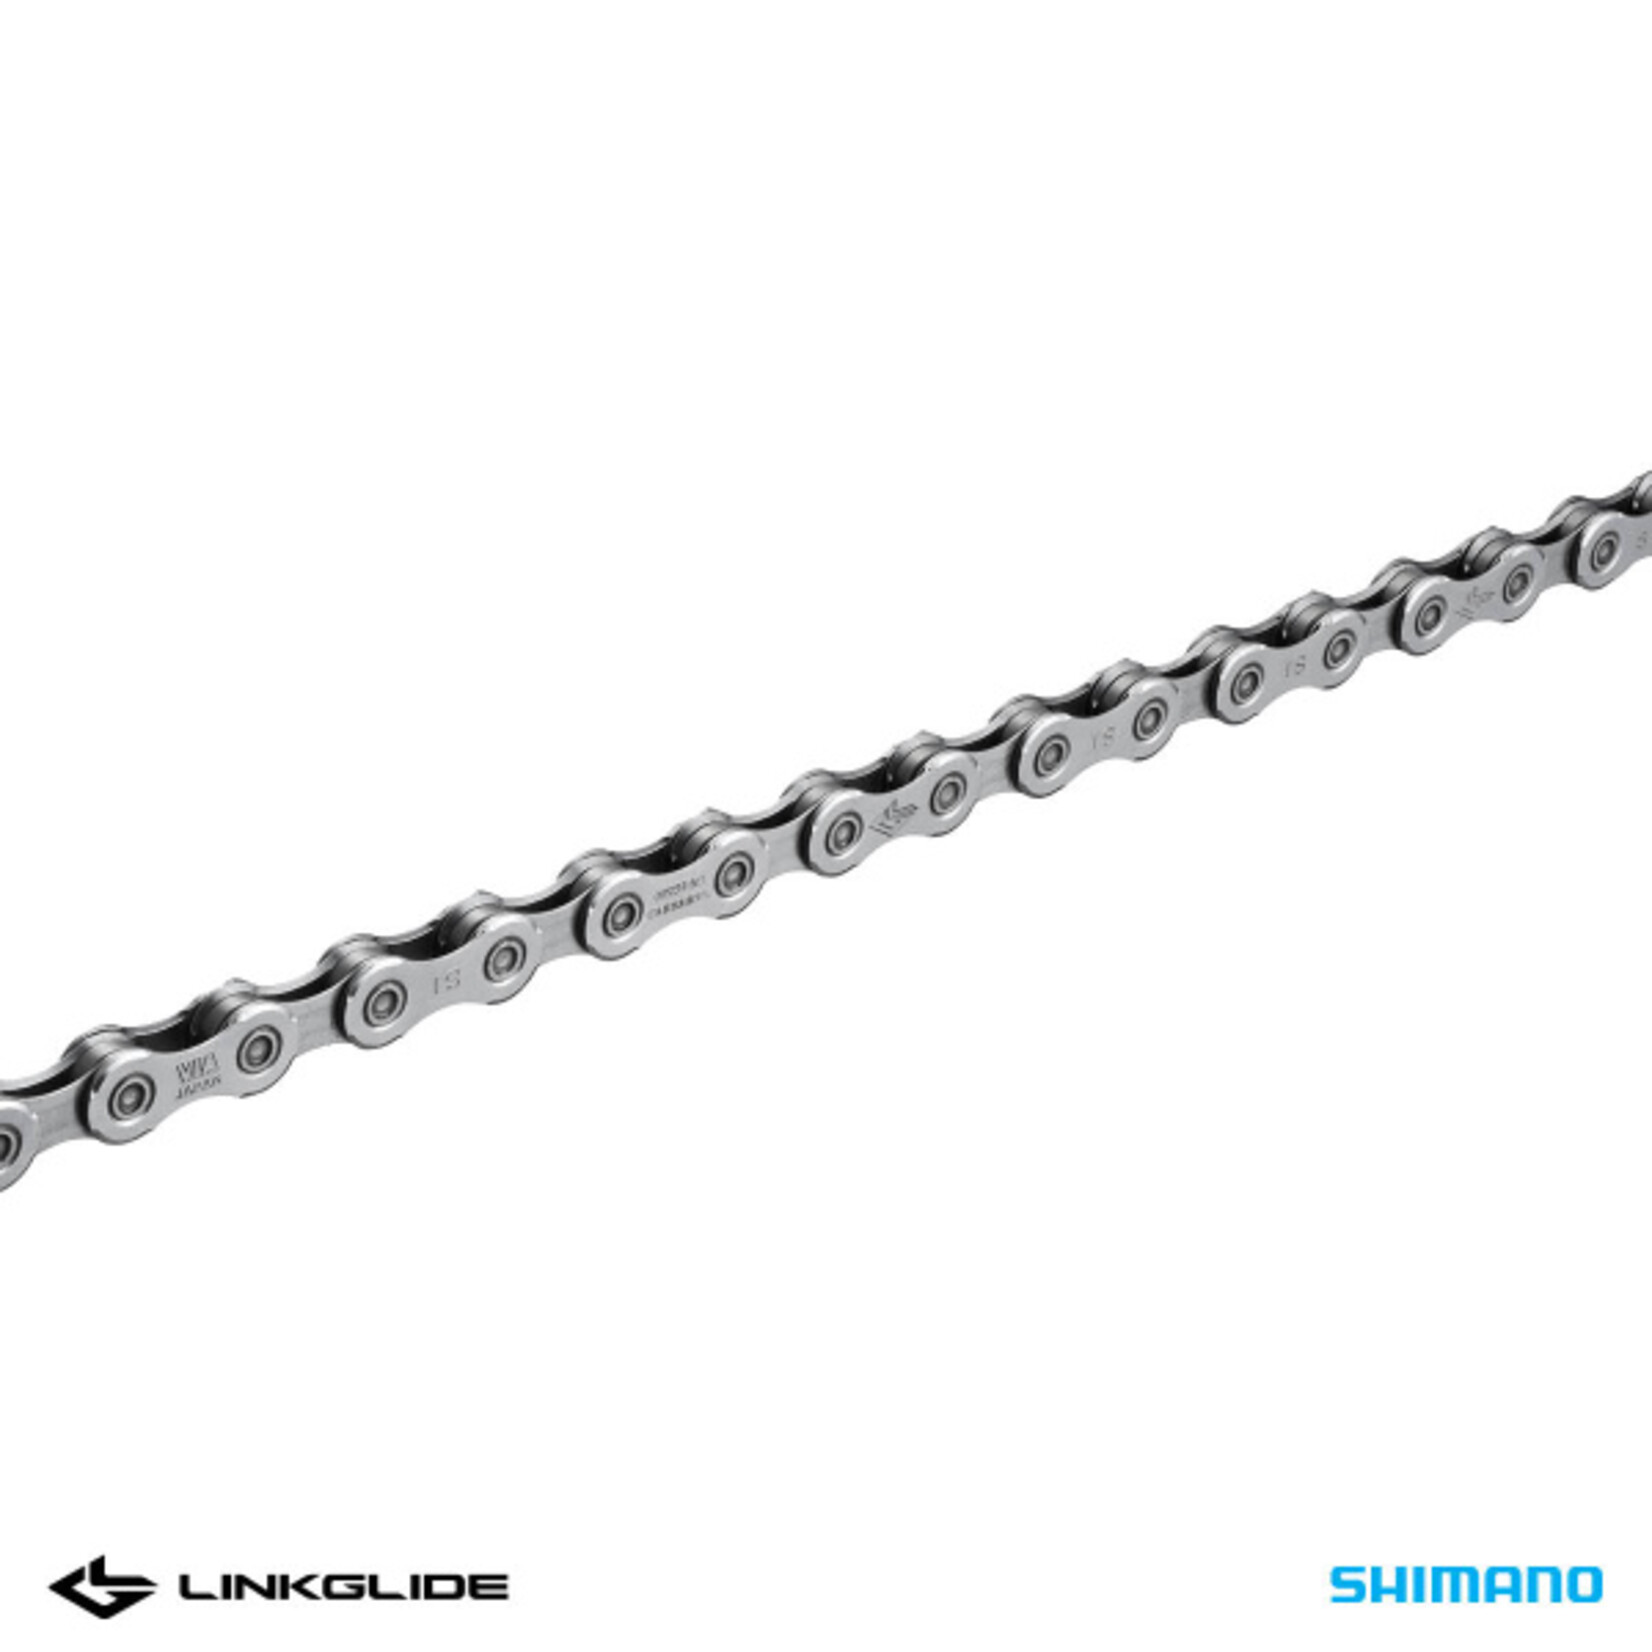 Shimano Shimano CN-LG500 Chain For Steps 9/10/11-Speed  w/ QUICK LINK LINKGLIDE